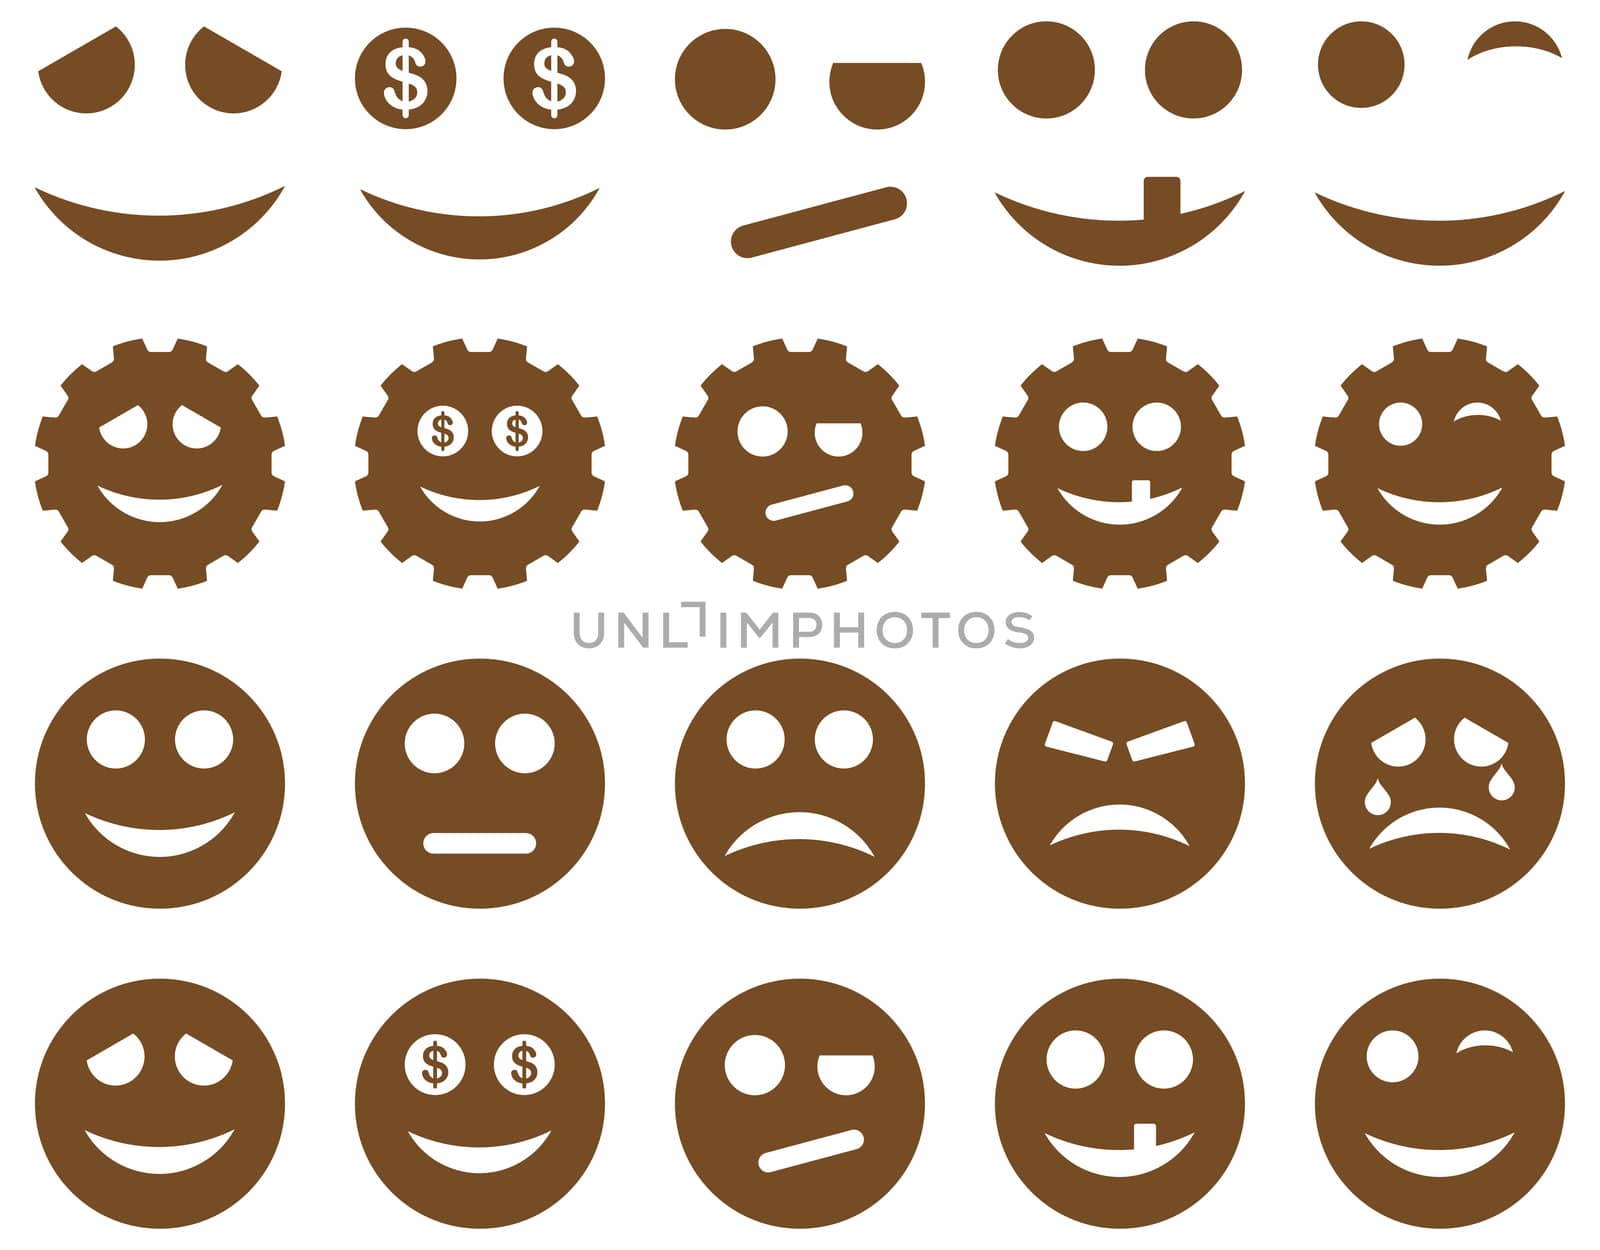 Tools, gears, smiles, emoticons icons. Glyph set style is flat images, brown symbols, isolated on a white background.